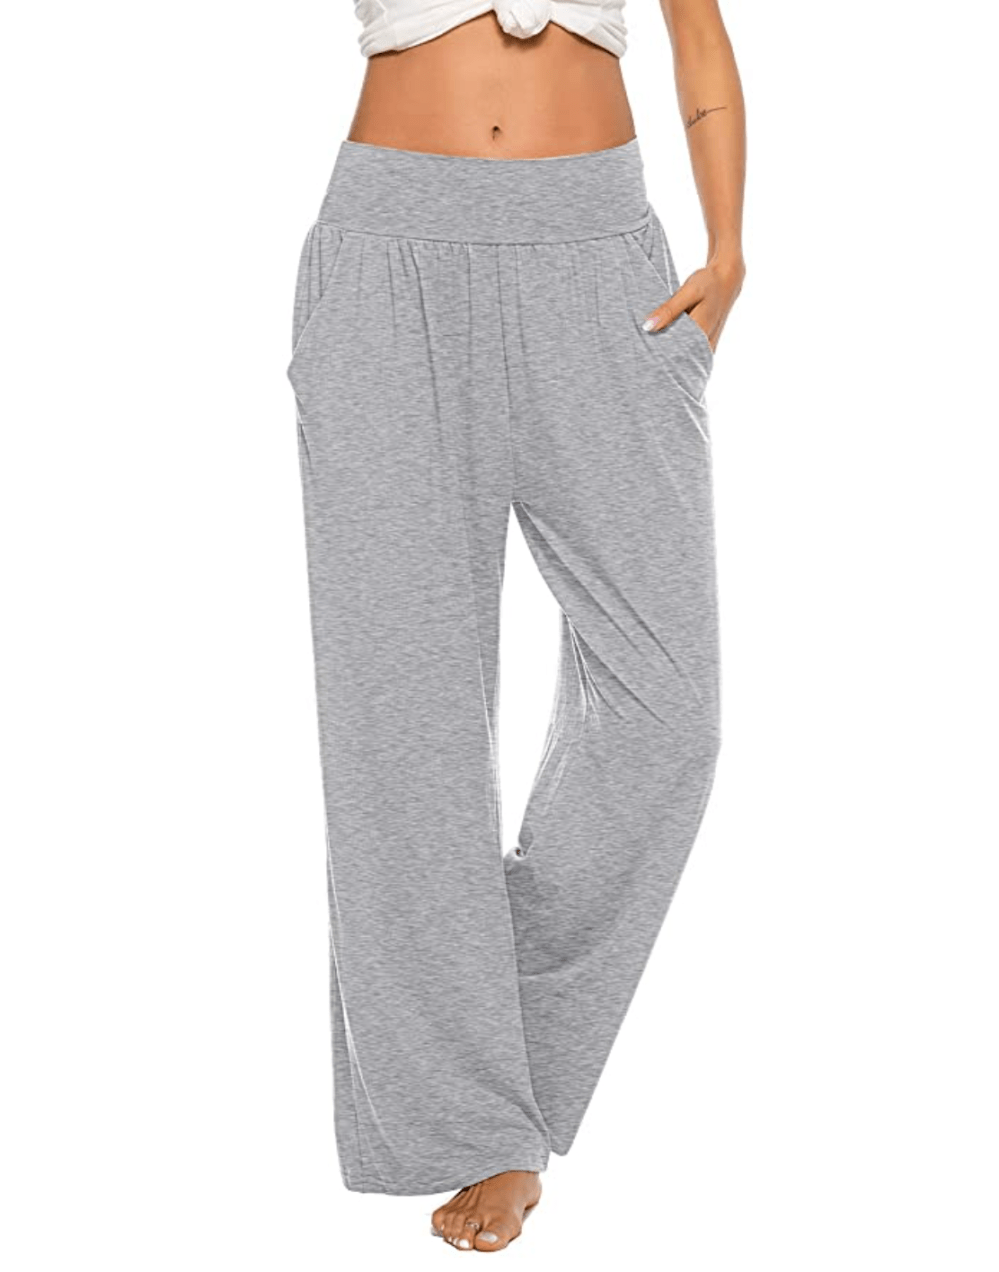 Zjct Seriously Comfy Sweats Complete Your Day-Off Lounge Look | Us Weekly